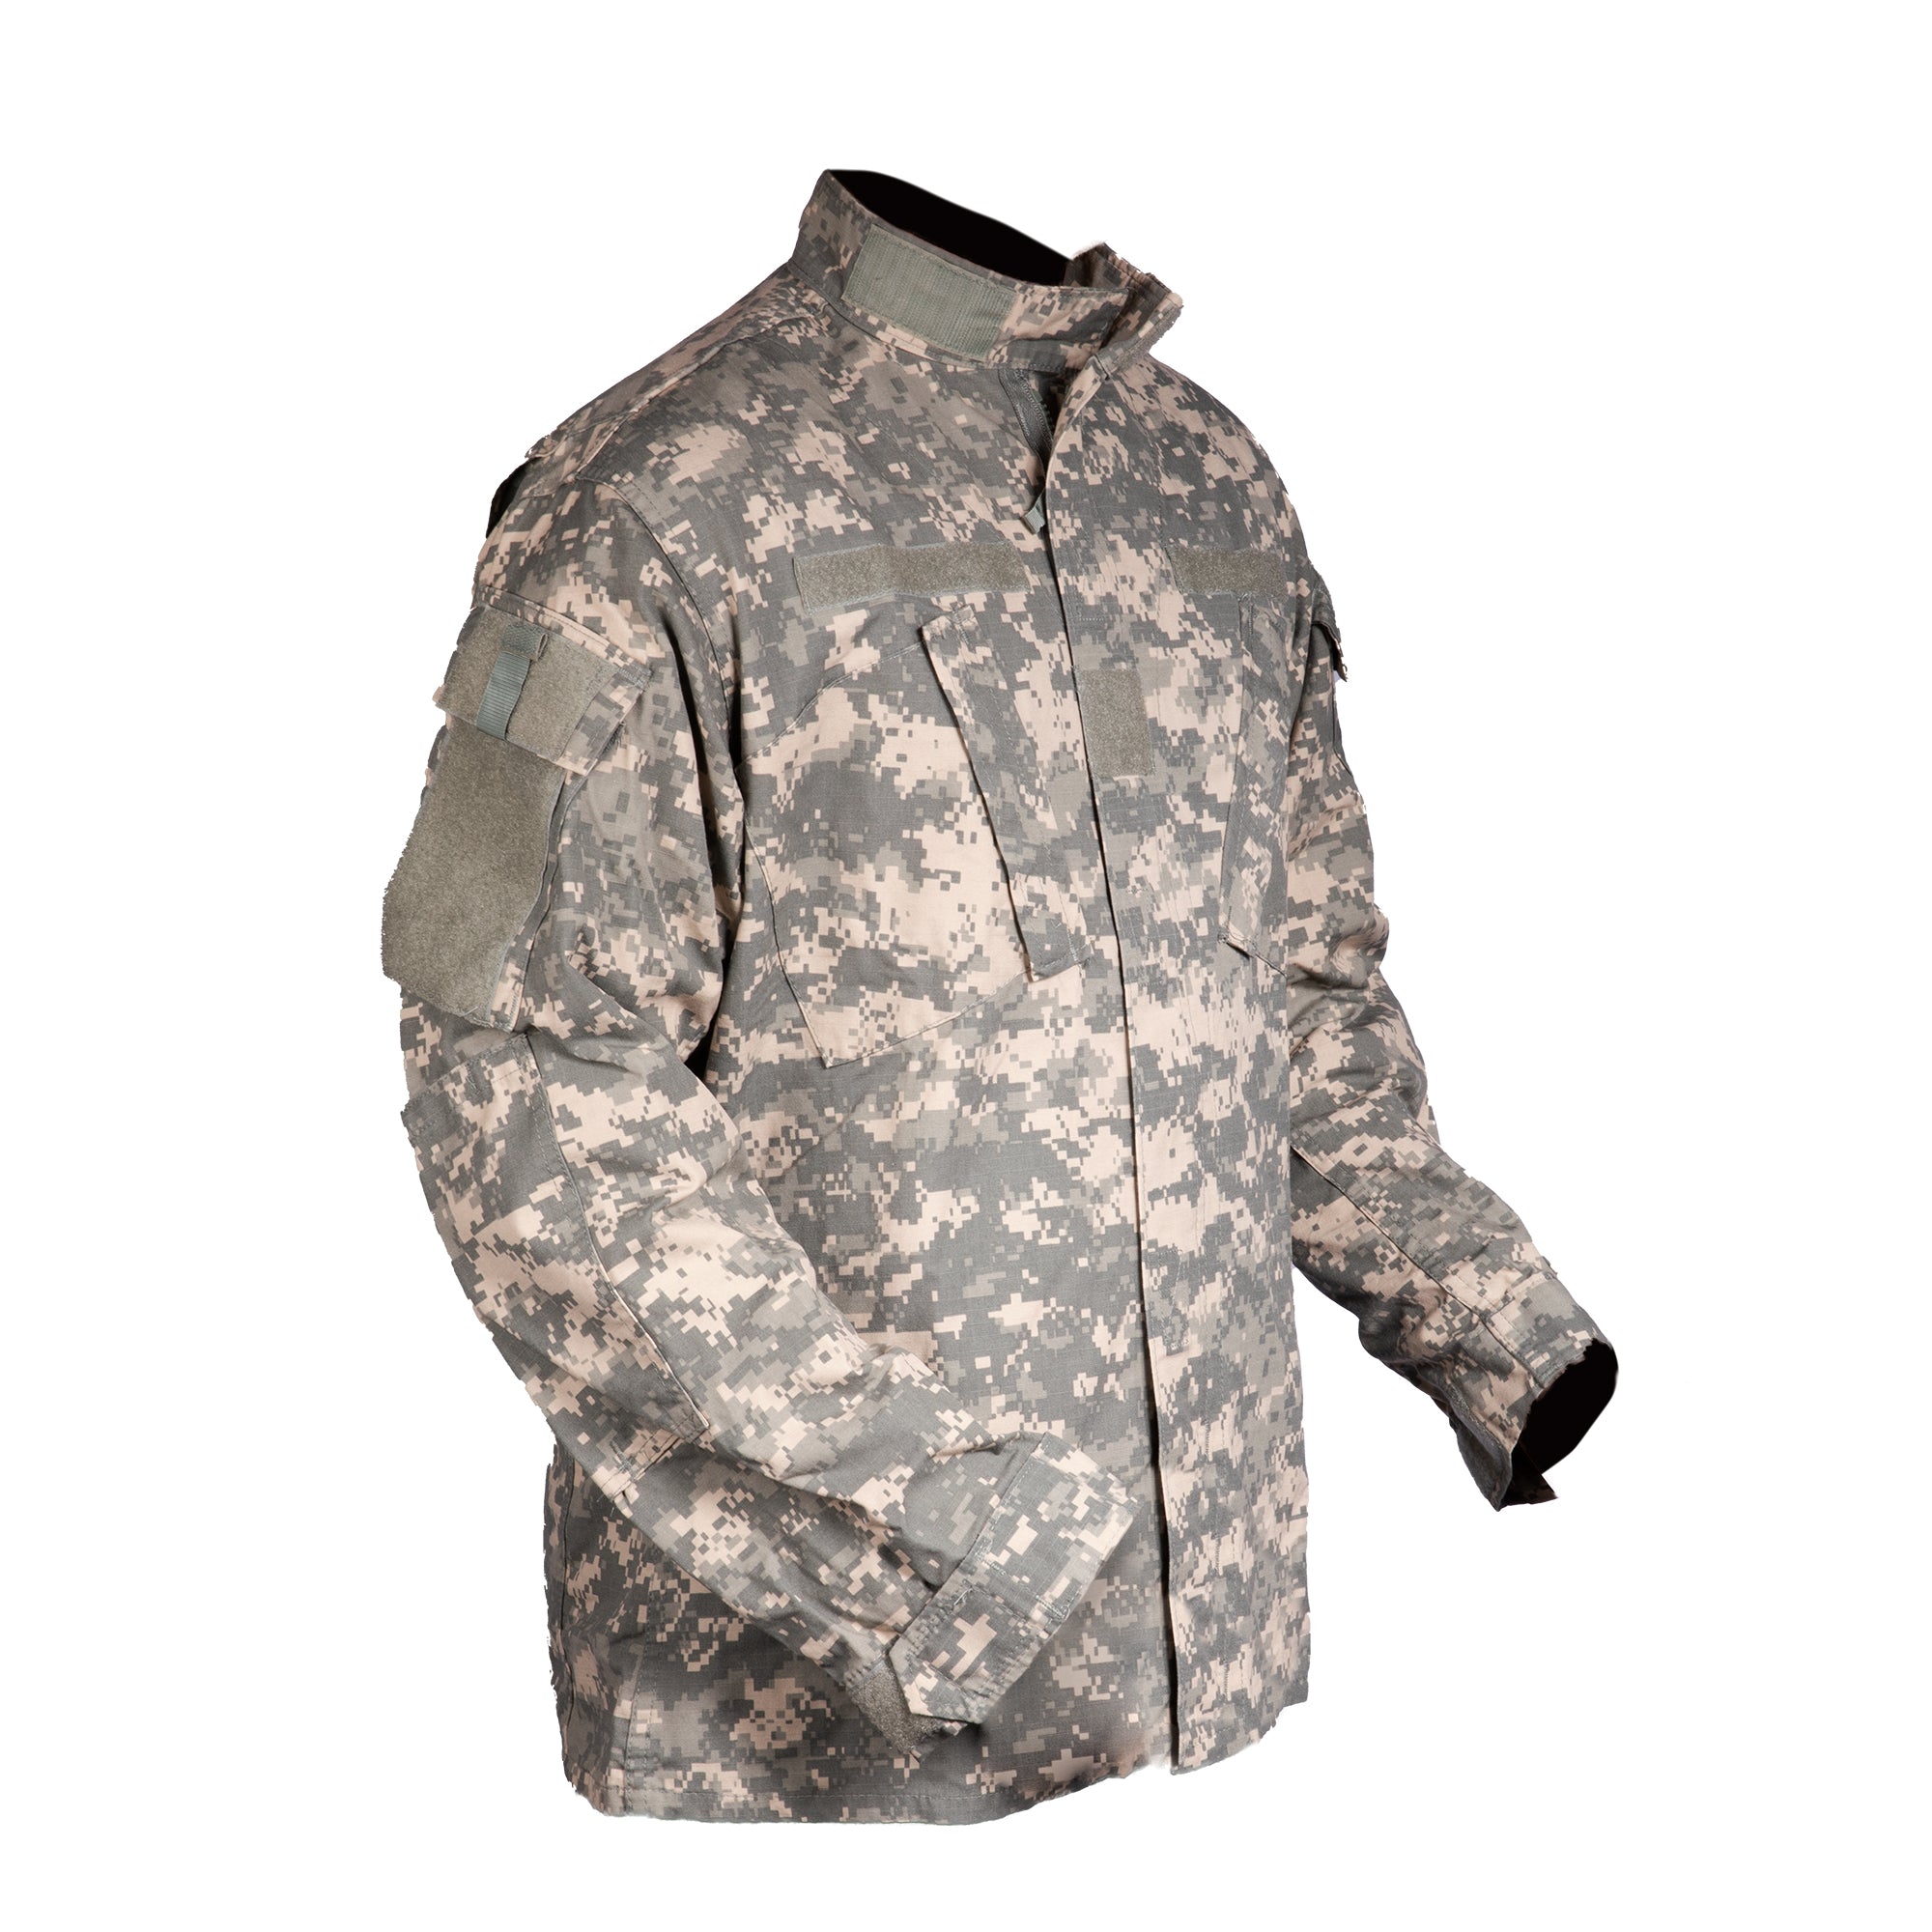 ARMY UCP Camo Coat ACU Military Digital Camouflage Shirt Insect